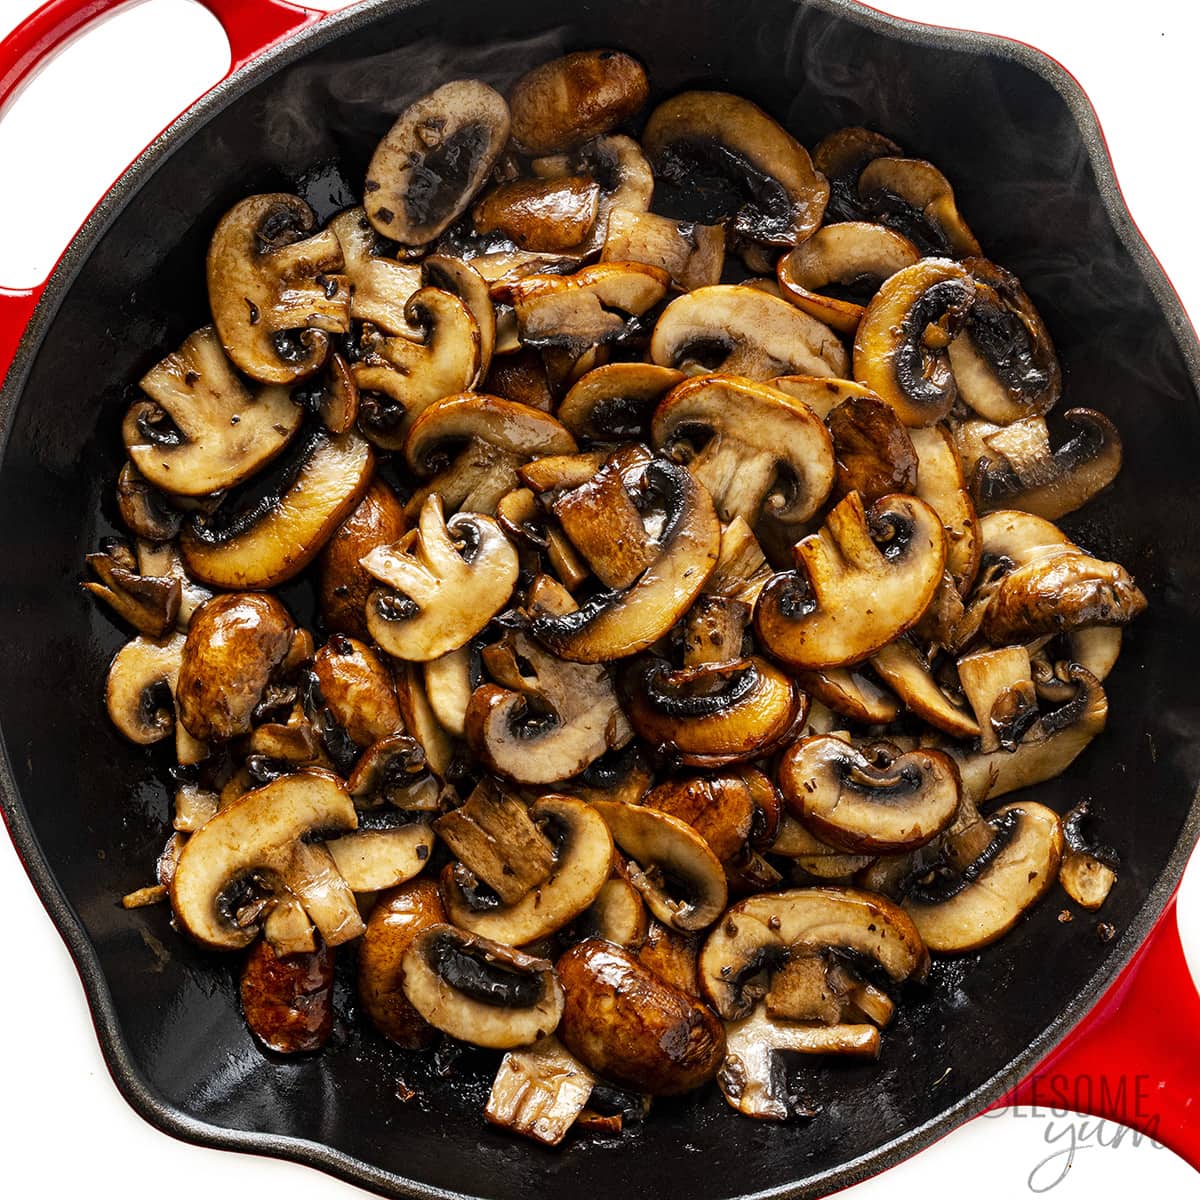 Add mushrooms to pan and saute until fragrant.